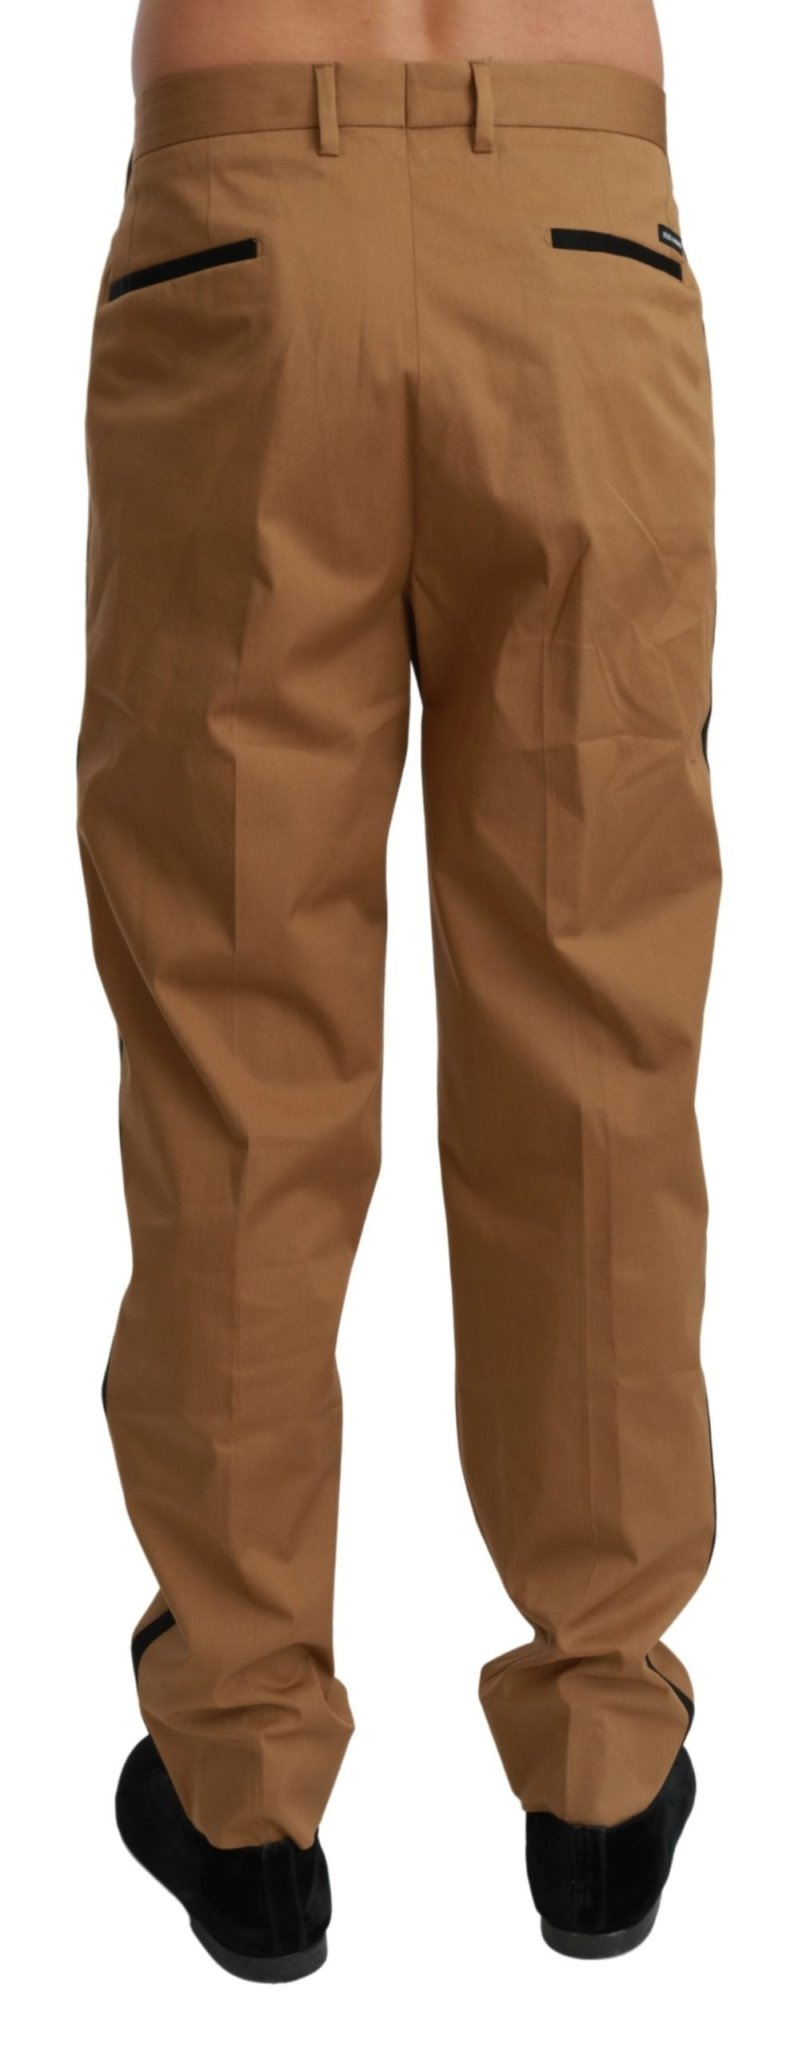 Brown Chinos Trousers Cotton Stretch Pants - Avaz Shop